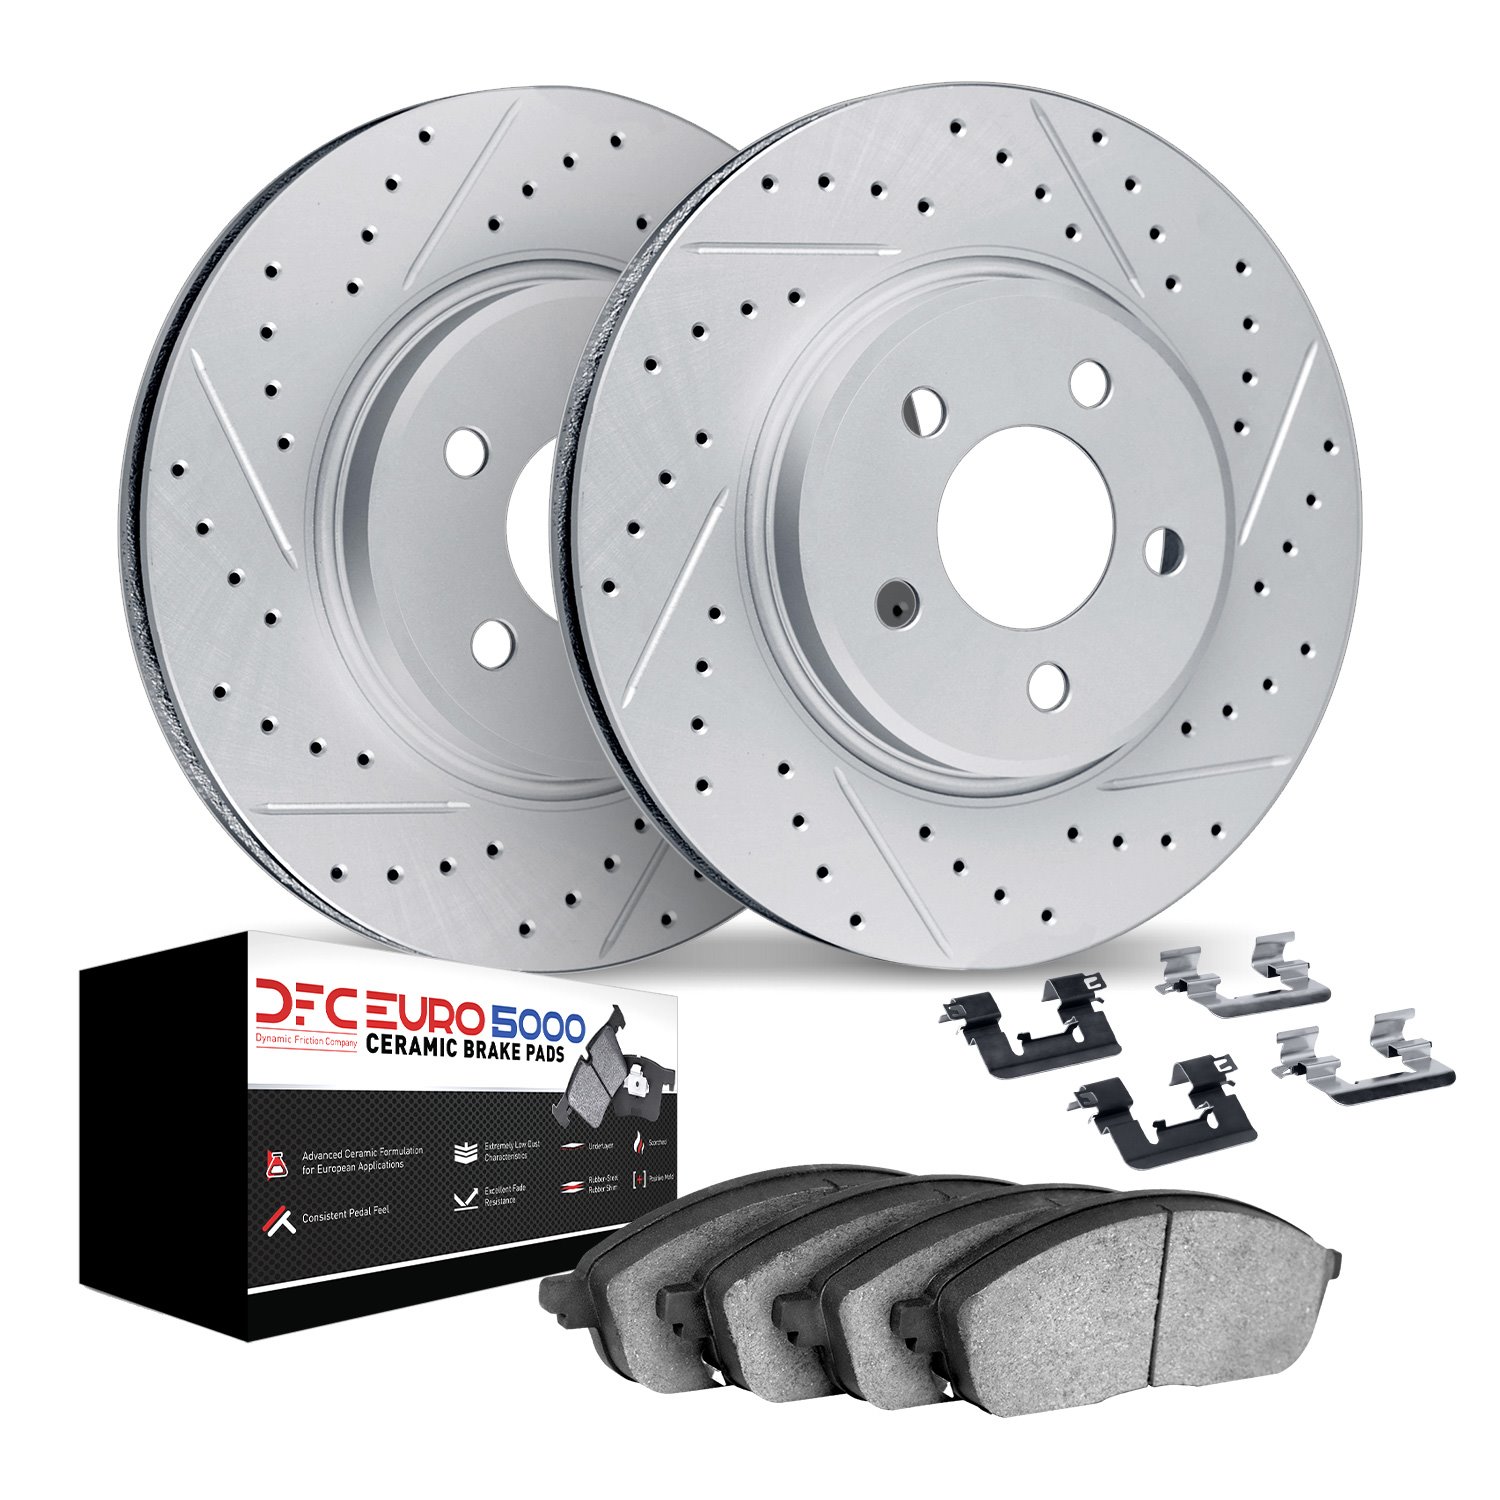 2612-02009 Geoperformance Drilled/Slotted Rotors w/5000 Euro Ceramic Brake Pads Kit & Hardware, 1967-1974 Porsche, Position: Fro